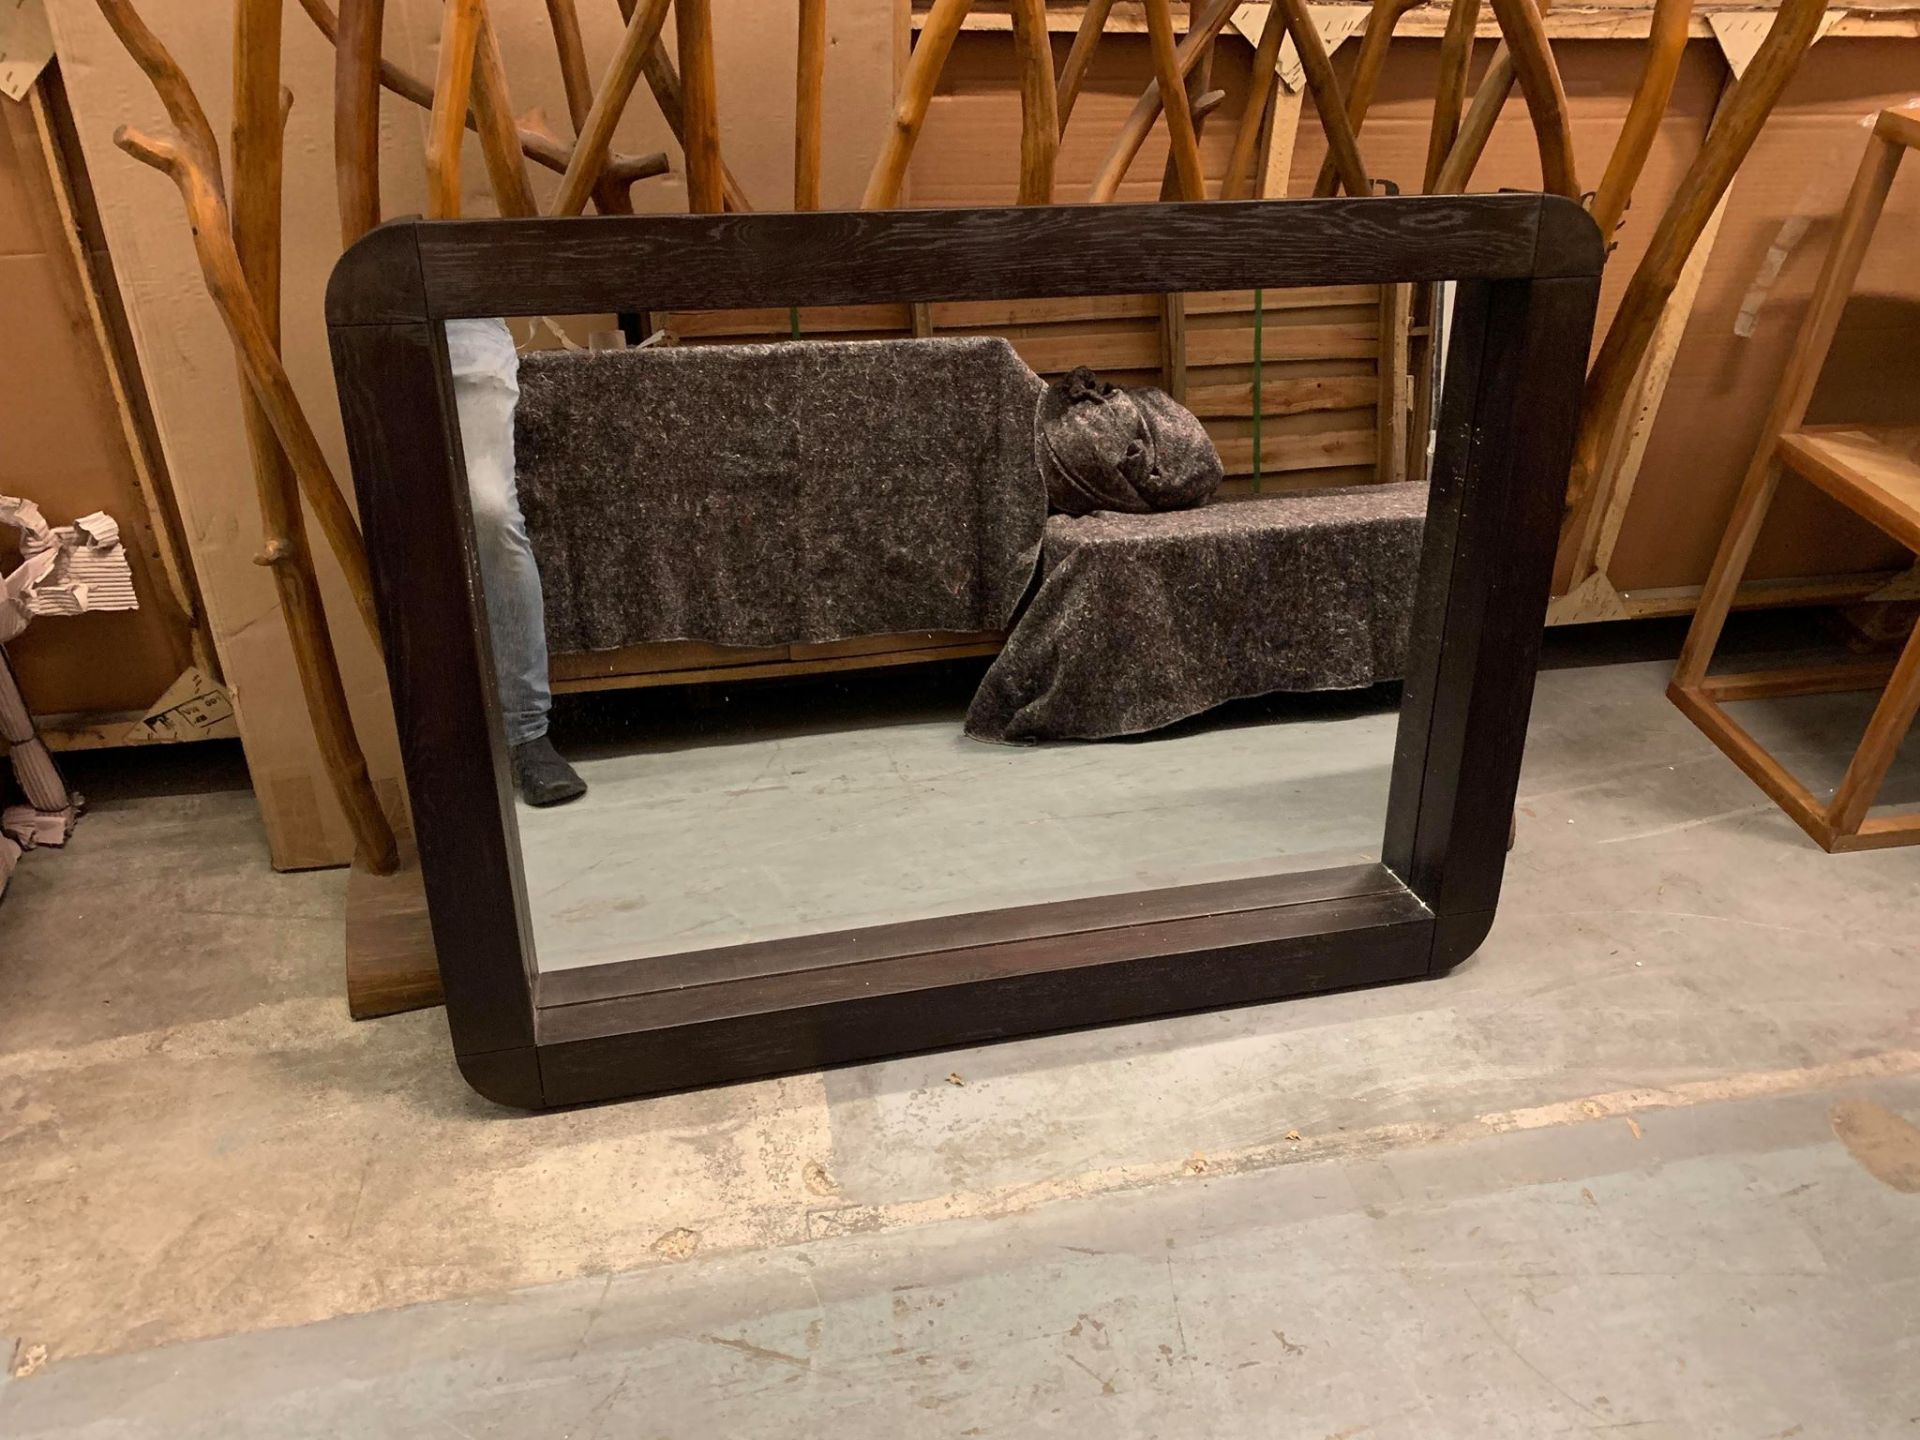 Oak Lounge Chocko Mirror Oak Lounge Chocko Mirror This Stunning Retro Oak Range Will Style Up Your - Image 3 of 3